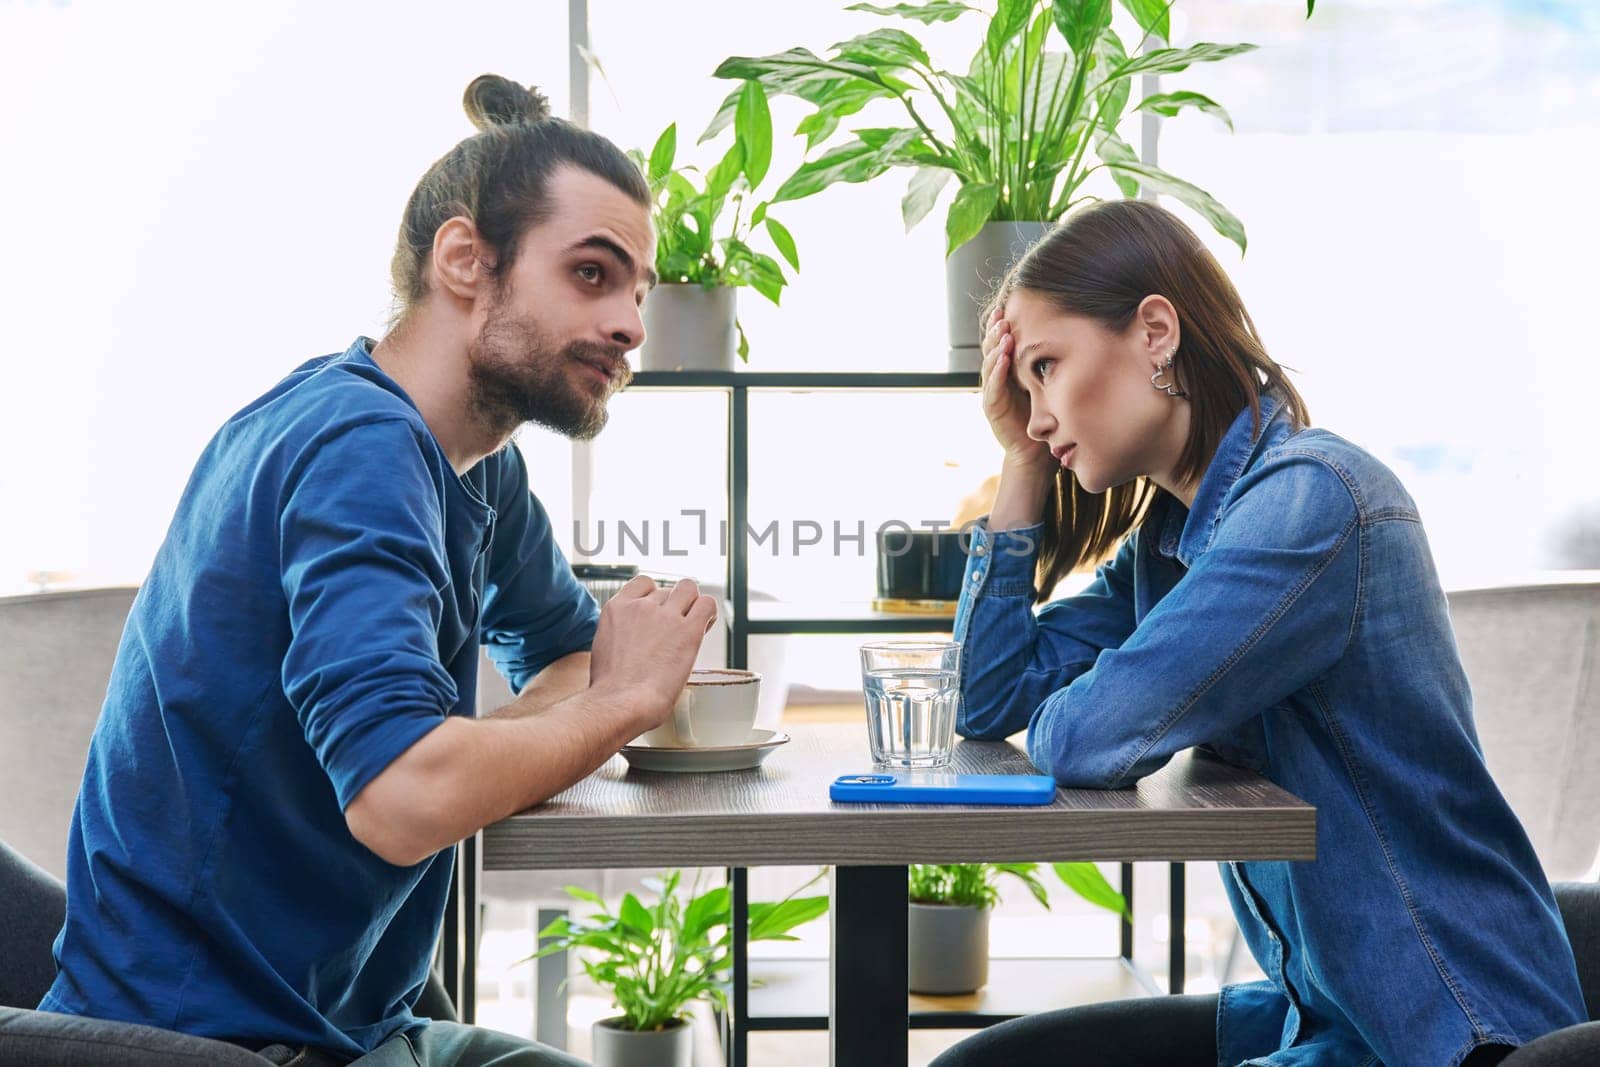 Serious aggressive young couple quarreling, angry, arguing, talking, nervous, sitting together at table in cafeteria. Relationships difficulties problems negative emotions lifestyle people concept